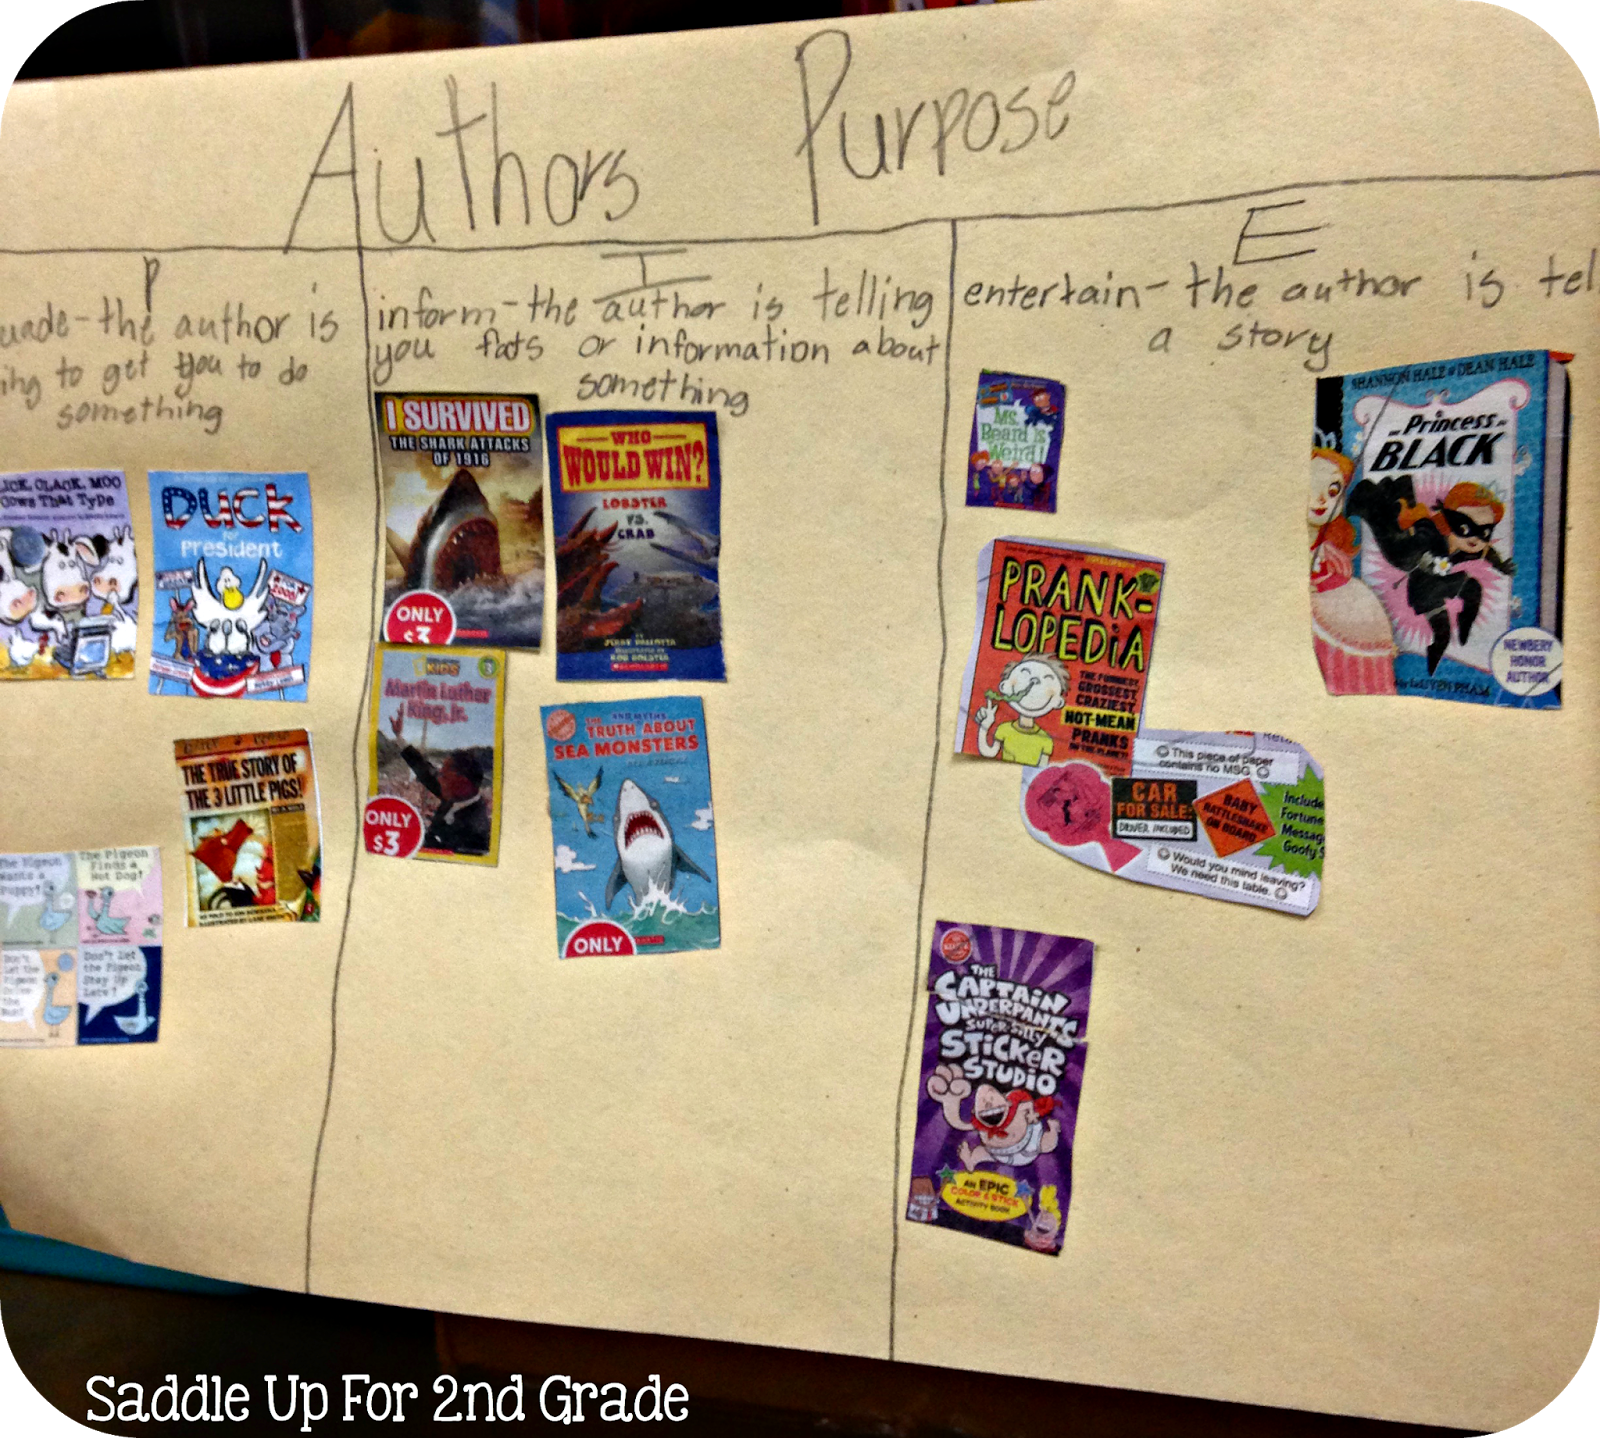 Informational Texts - Author's Purpose for Grade 2